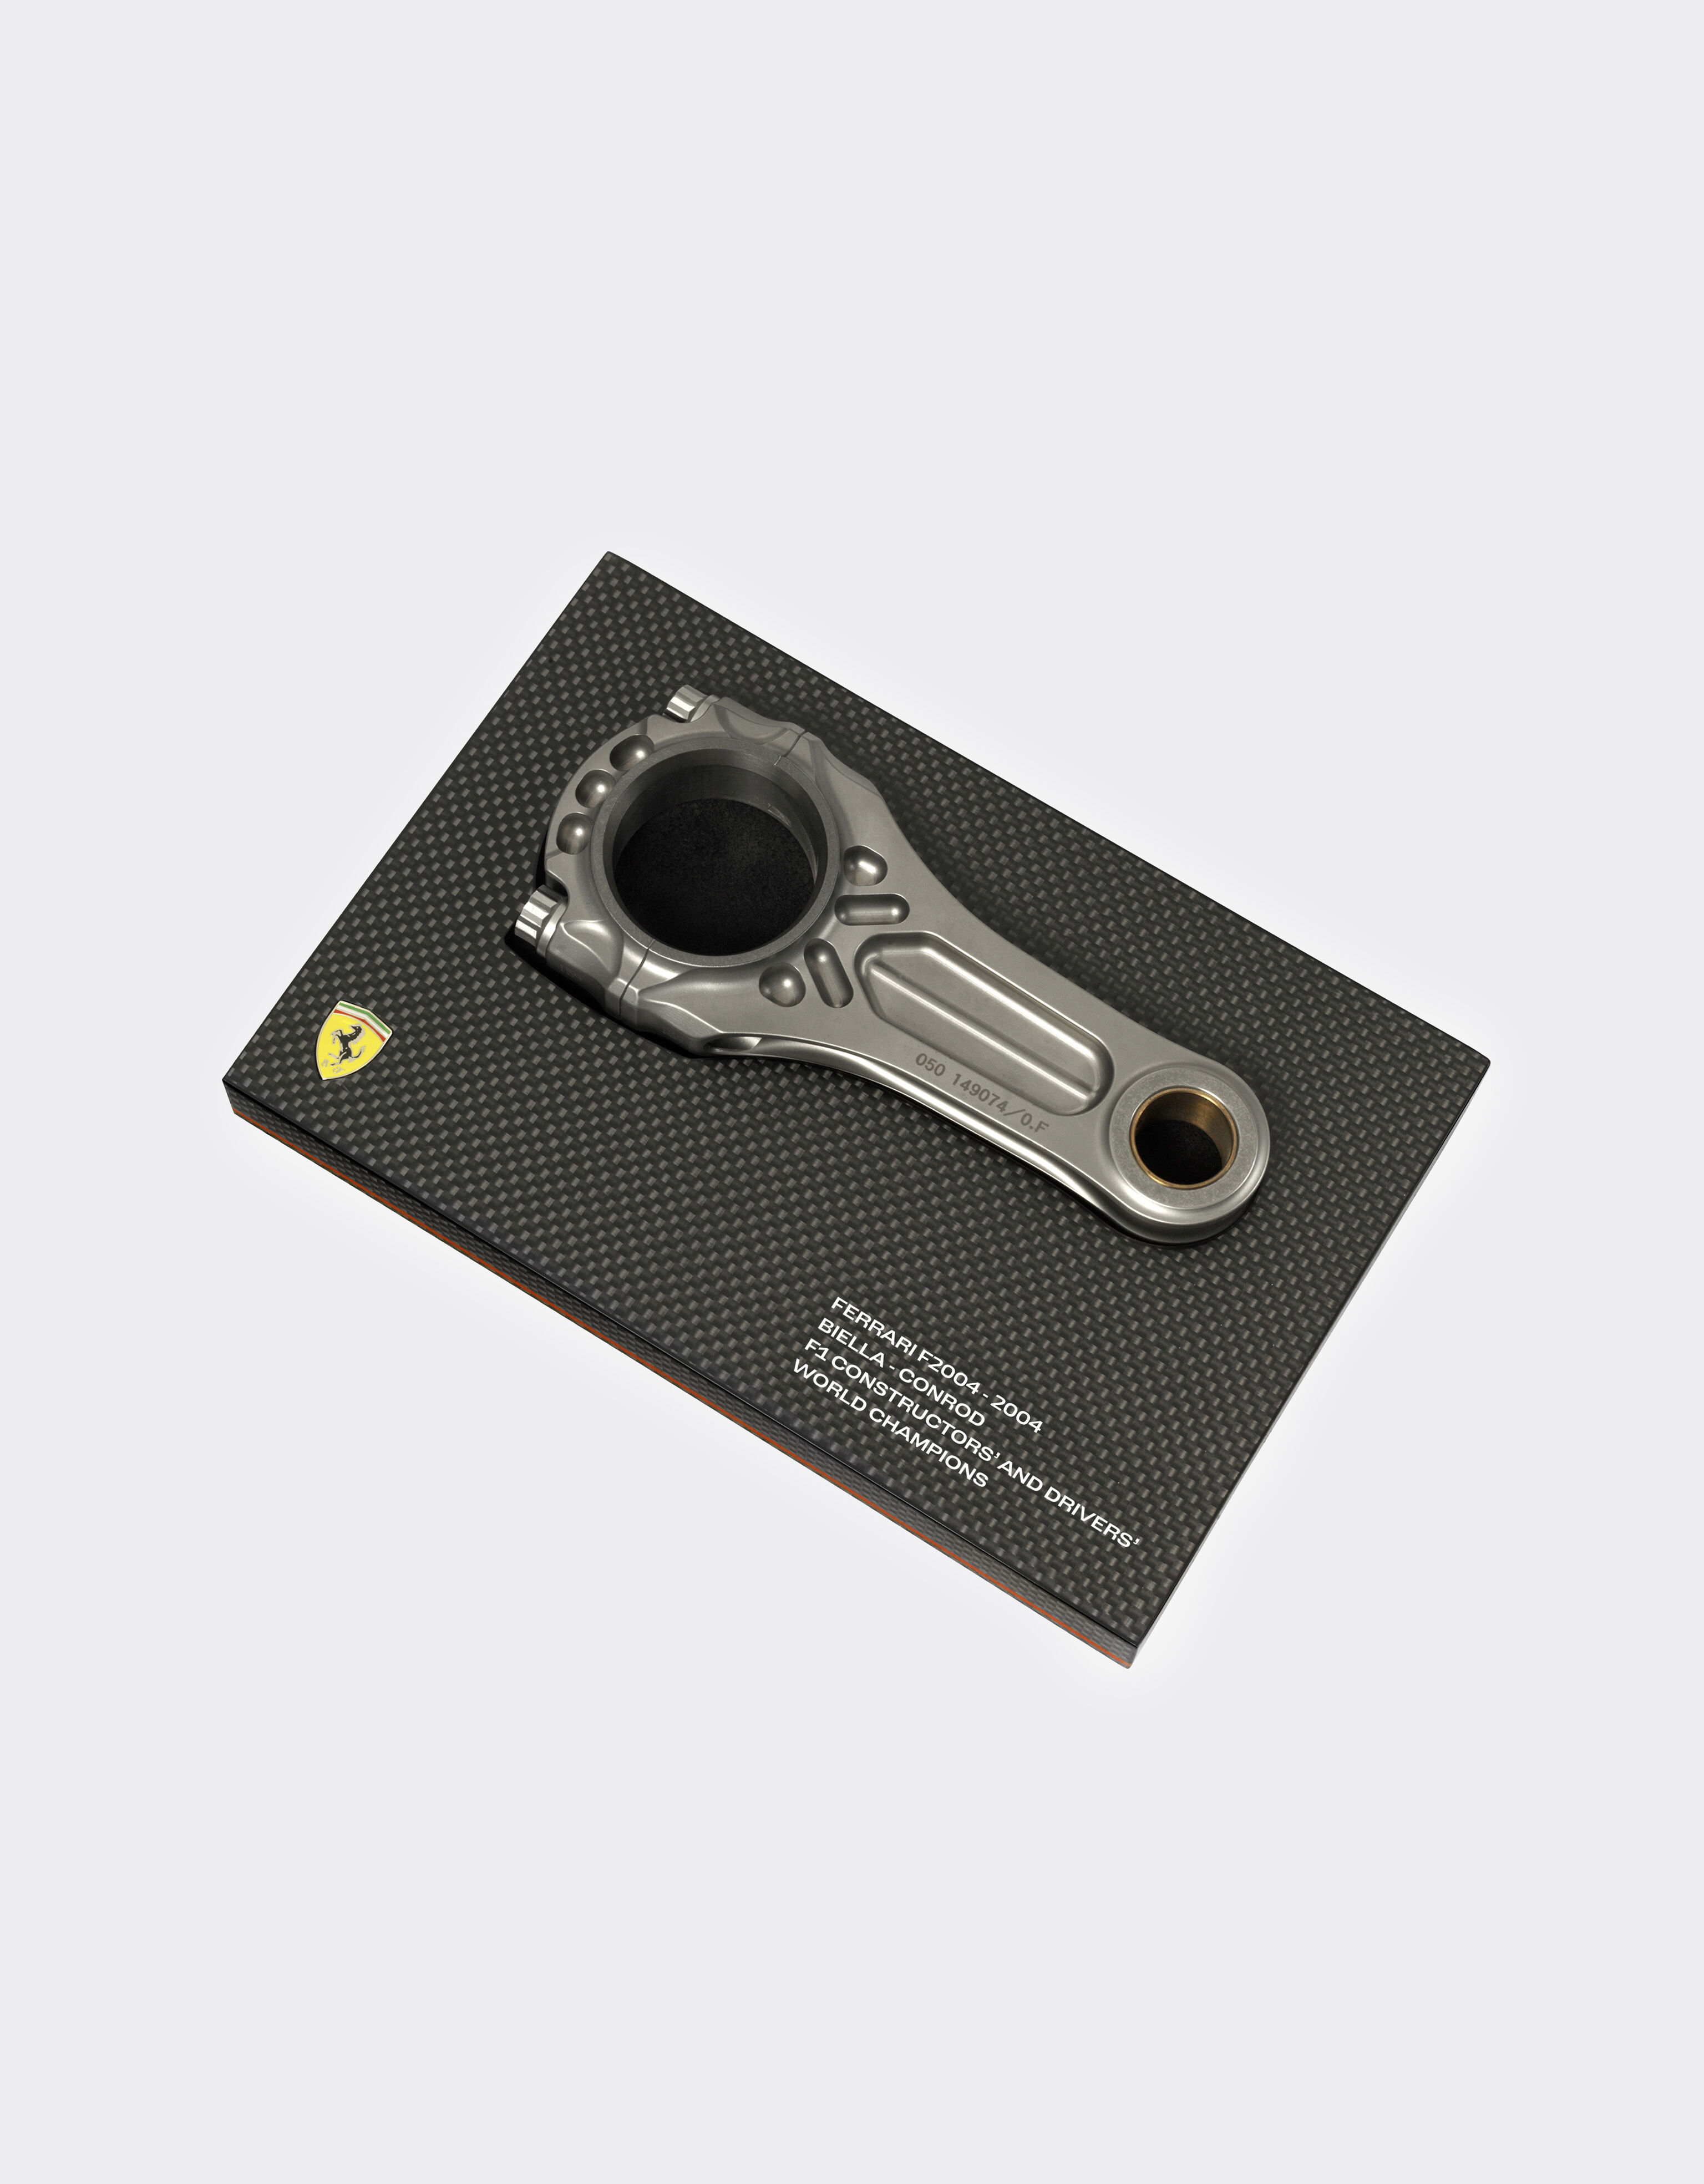 Ferrari Original connecting rod from the F2004, winner of the 2004 Constructors' and Drivers' Championships Black 48104f